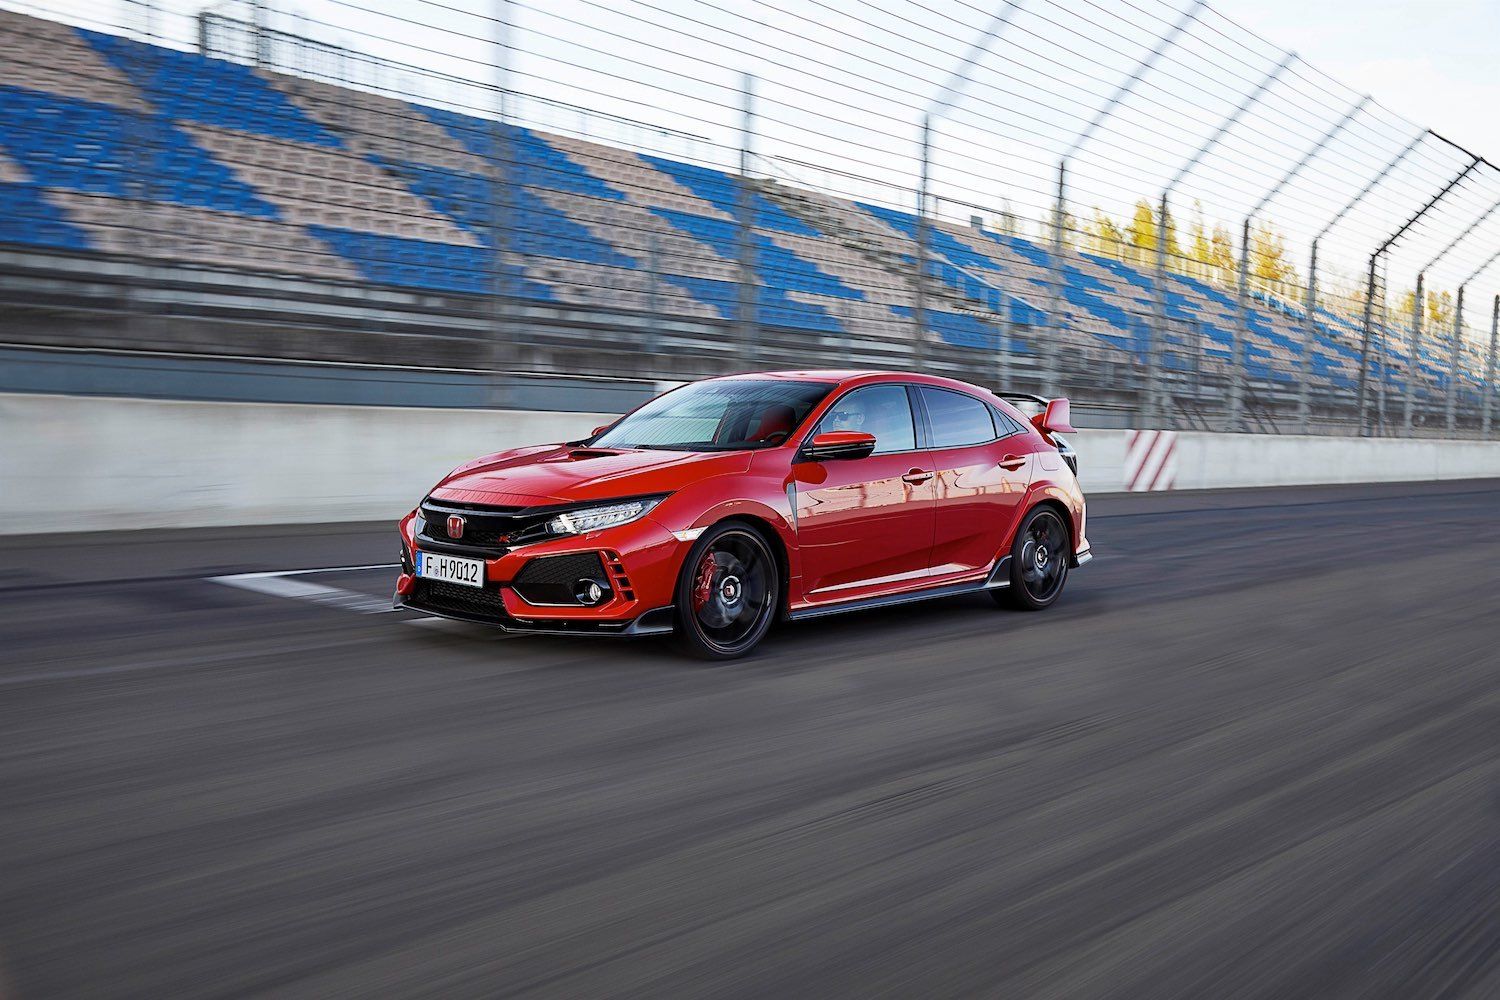 Tim Barnes-Clay reviews the 2018 Honda Civic Type R at the first drives 3